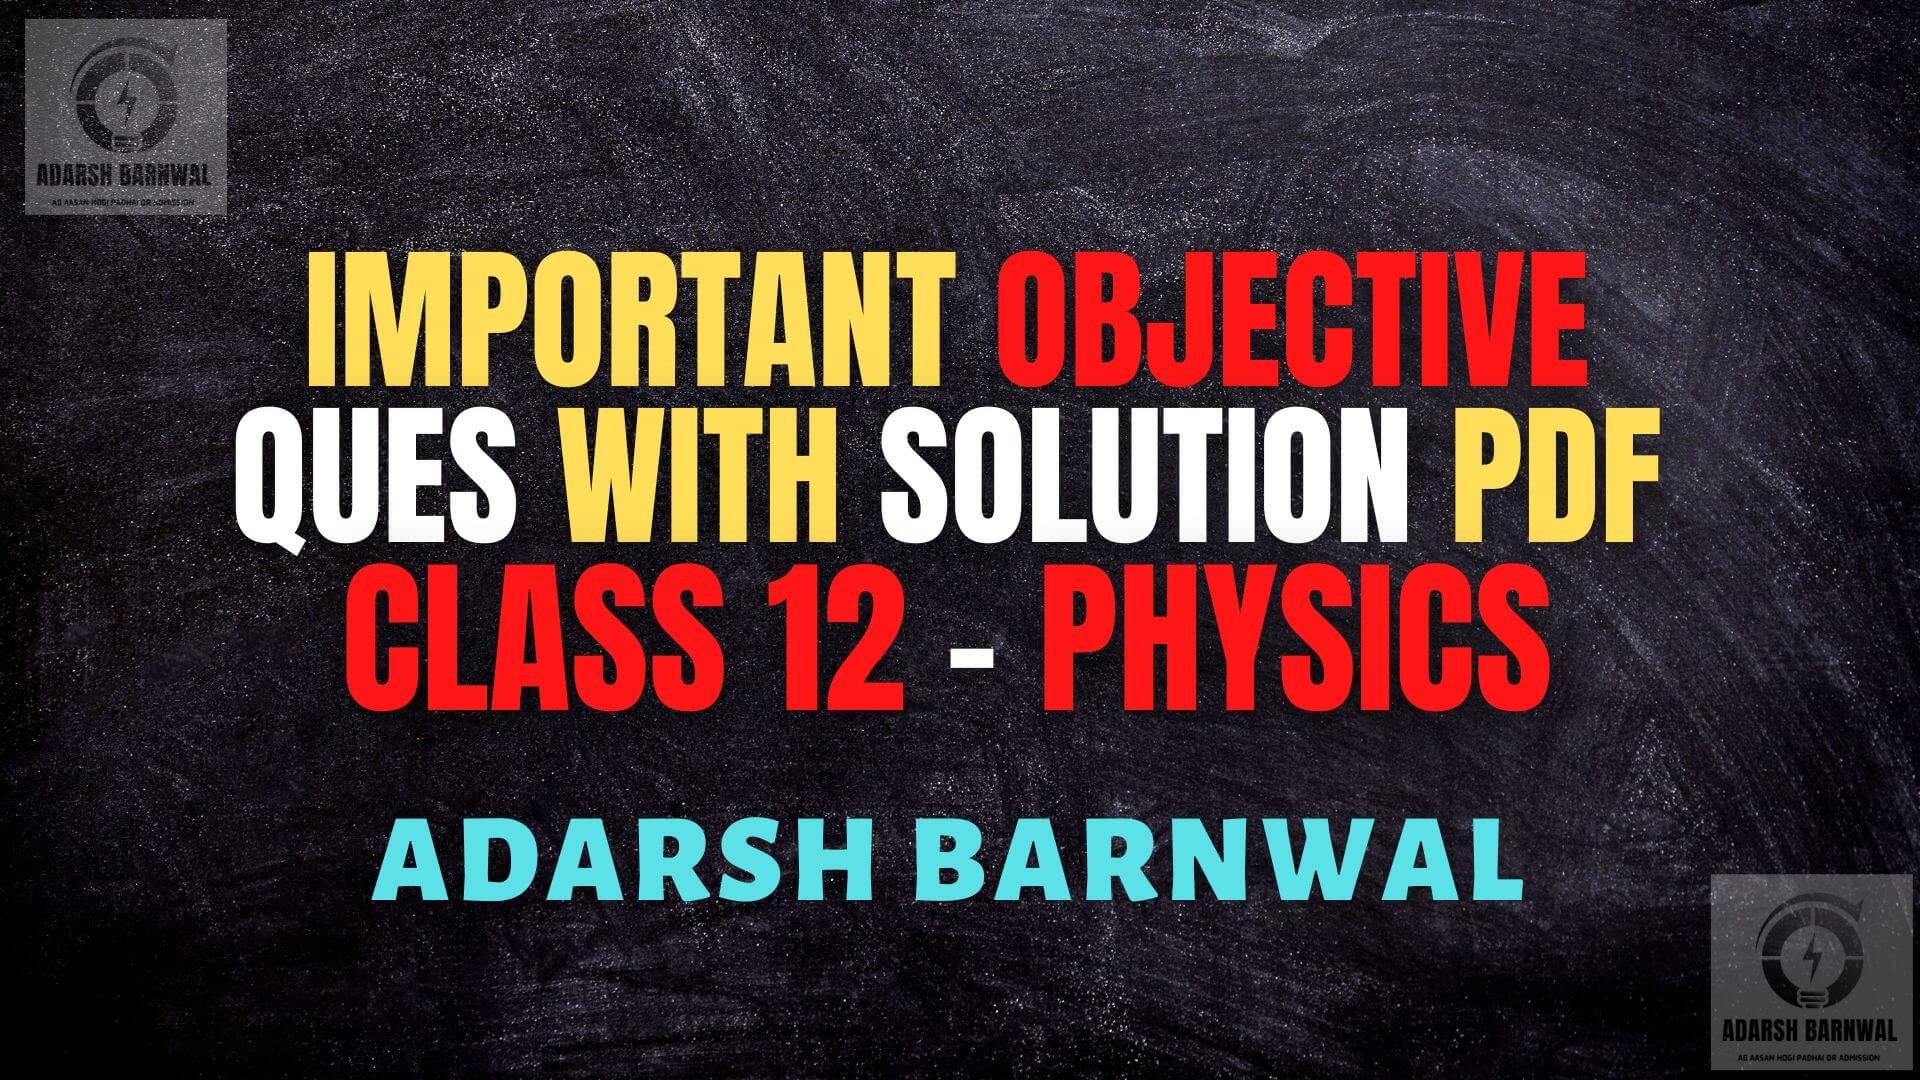 Class 12 Physics Important Objective questions 2023-2024 by Adarsh Barnwal